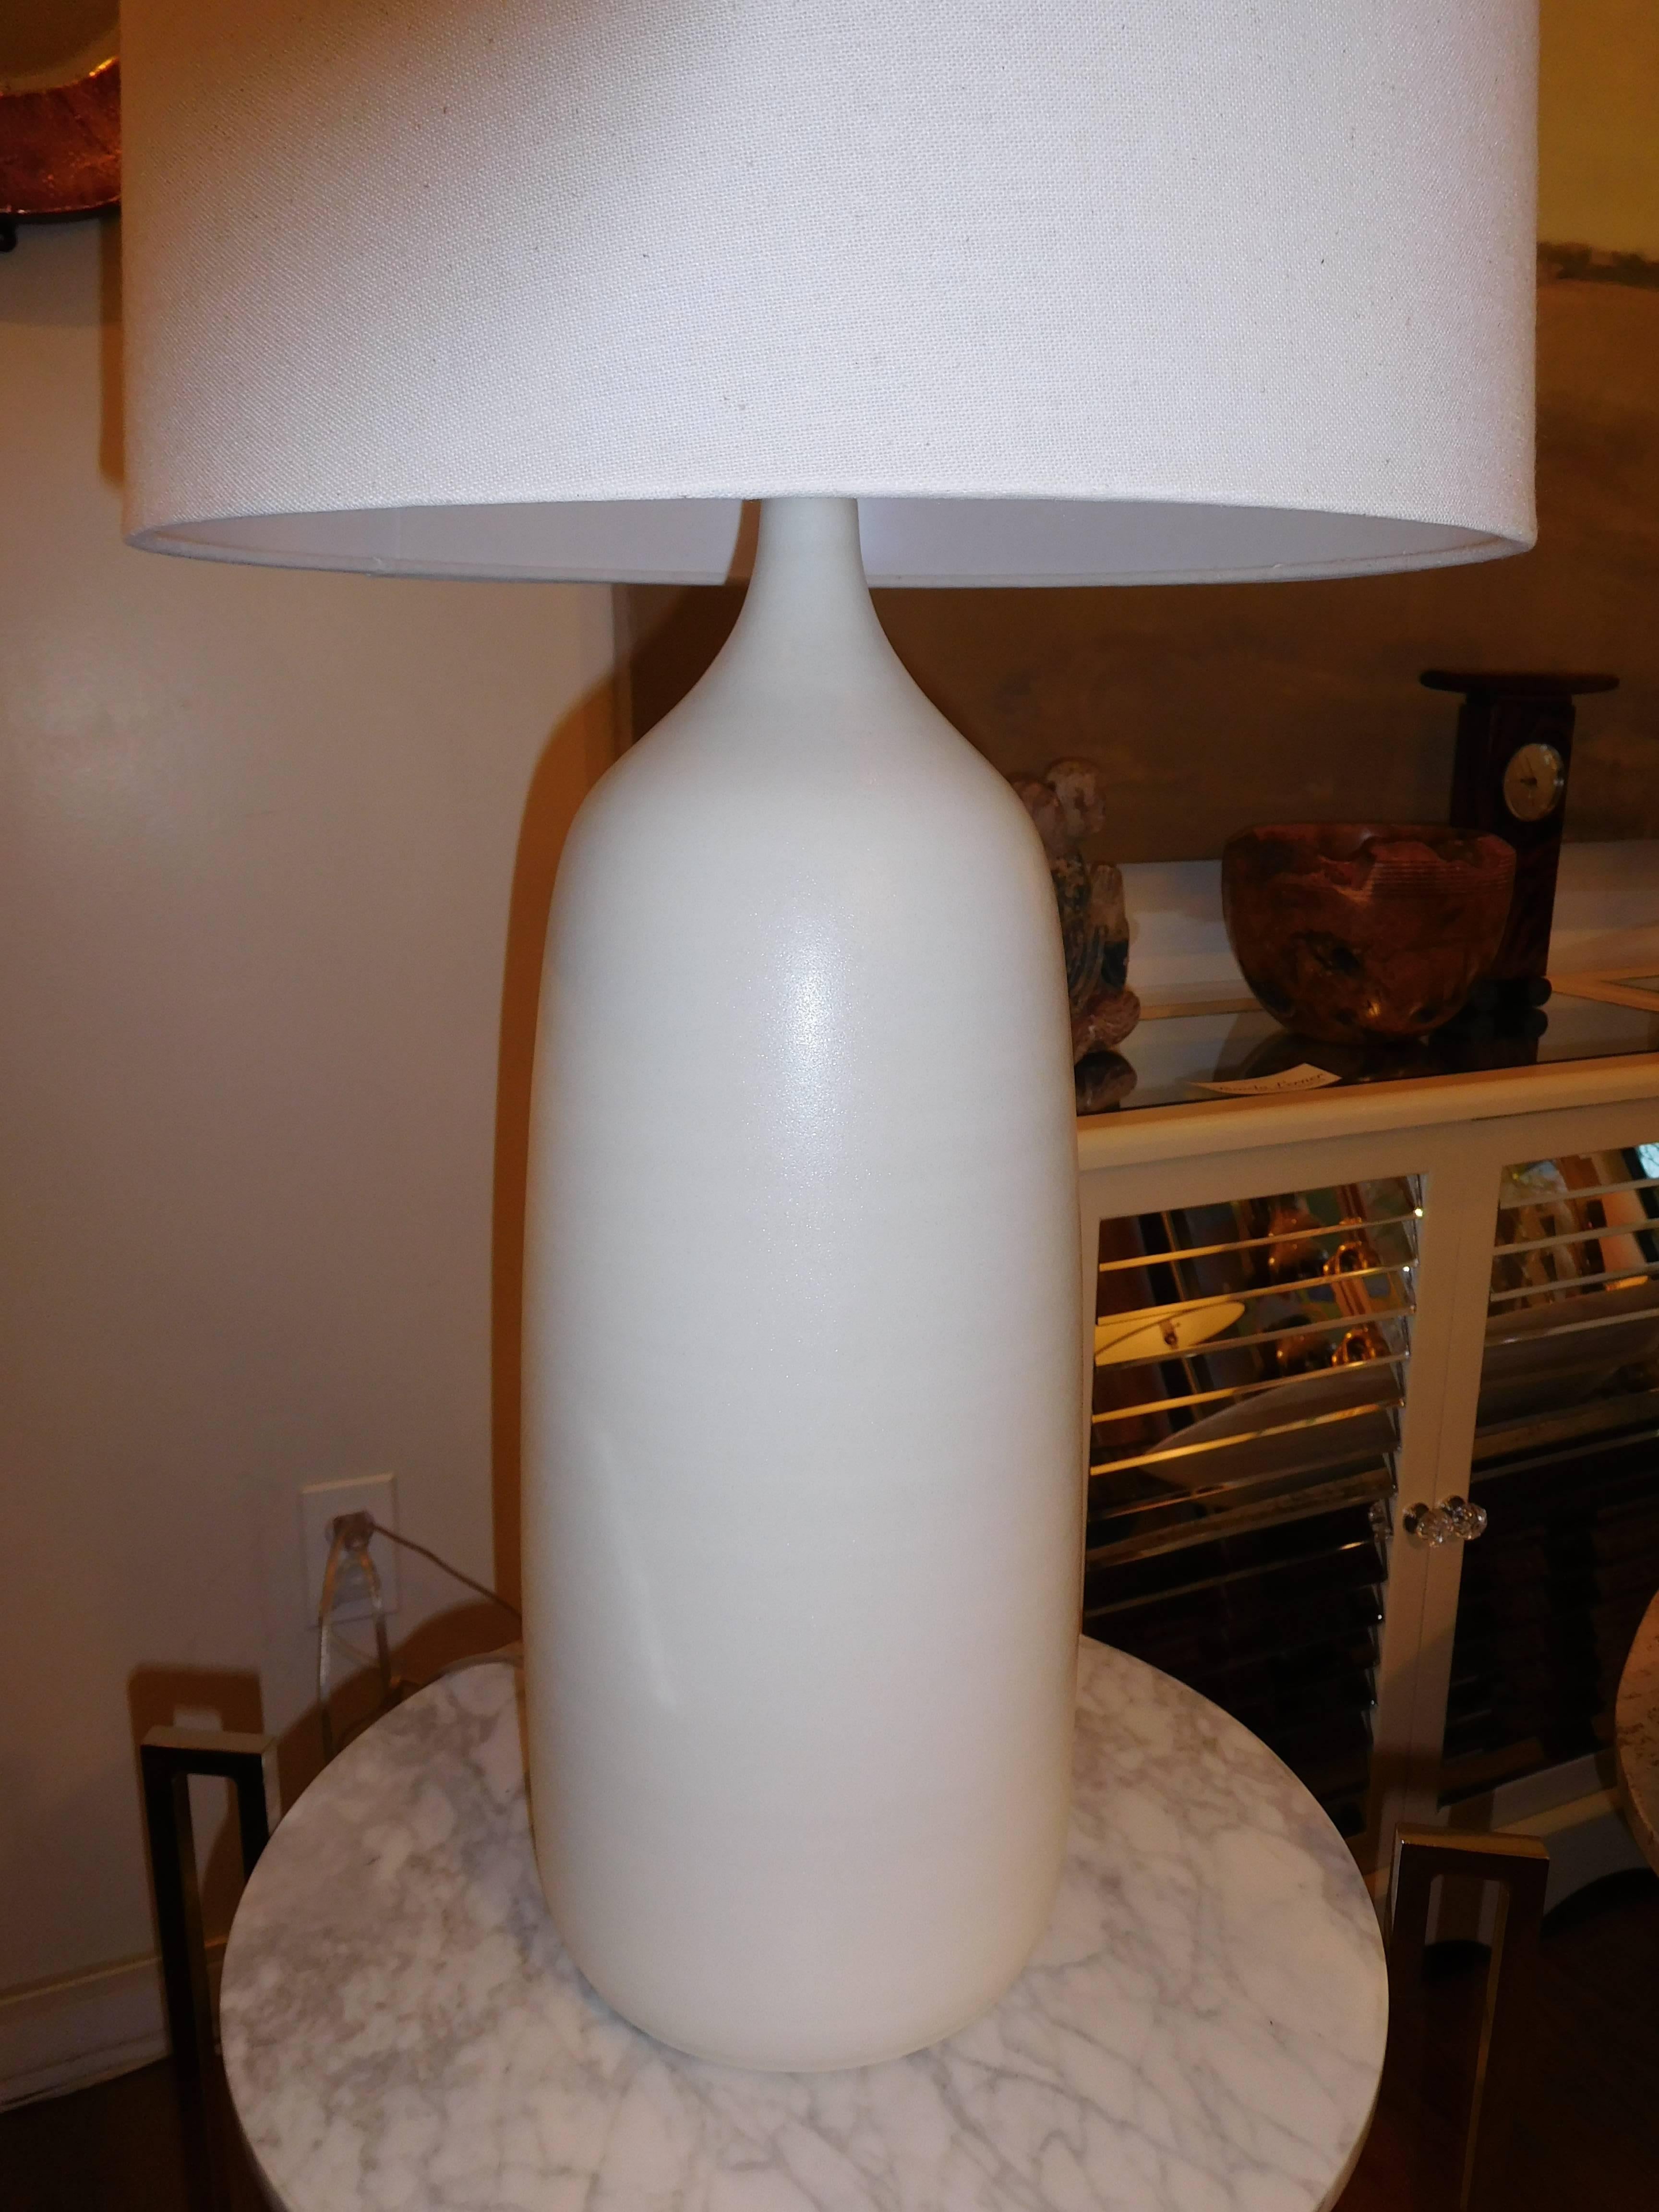 Pair of beautifully textured and handcrafted and hand brushed studio pottery lamps.
There are two available, with a three way light switch up to 150 watts.
Linen shade included.
The measurement from base to socket is 22 inches and 28 inches to the